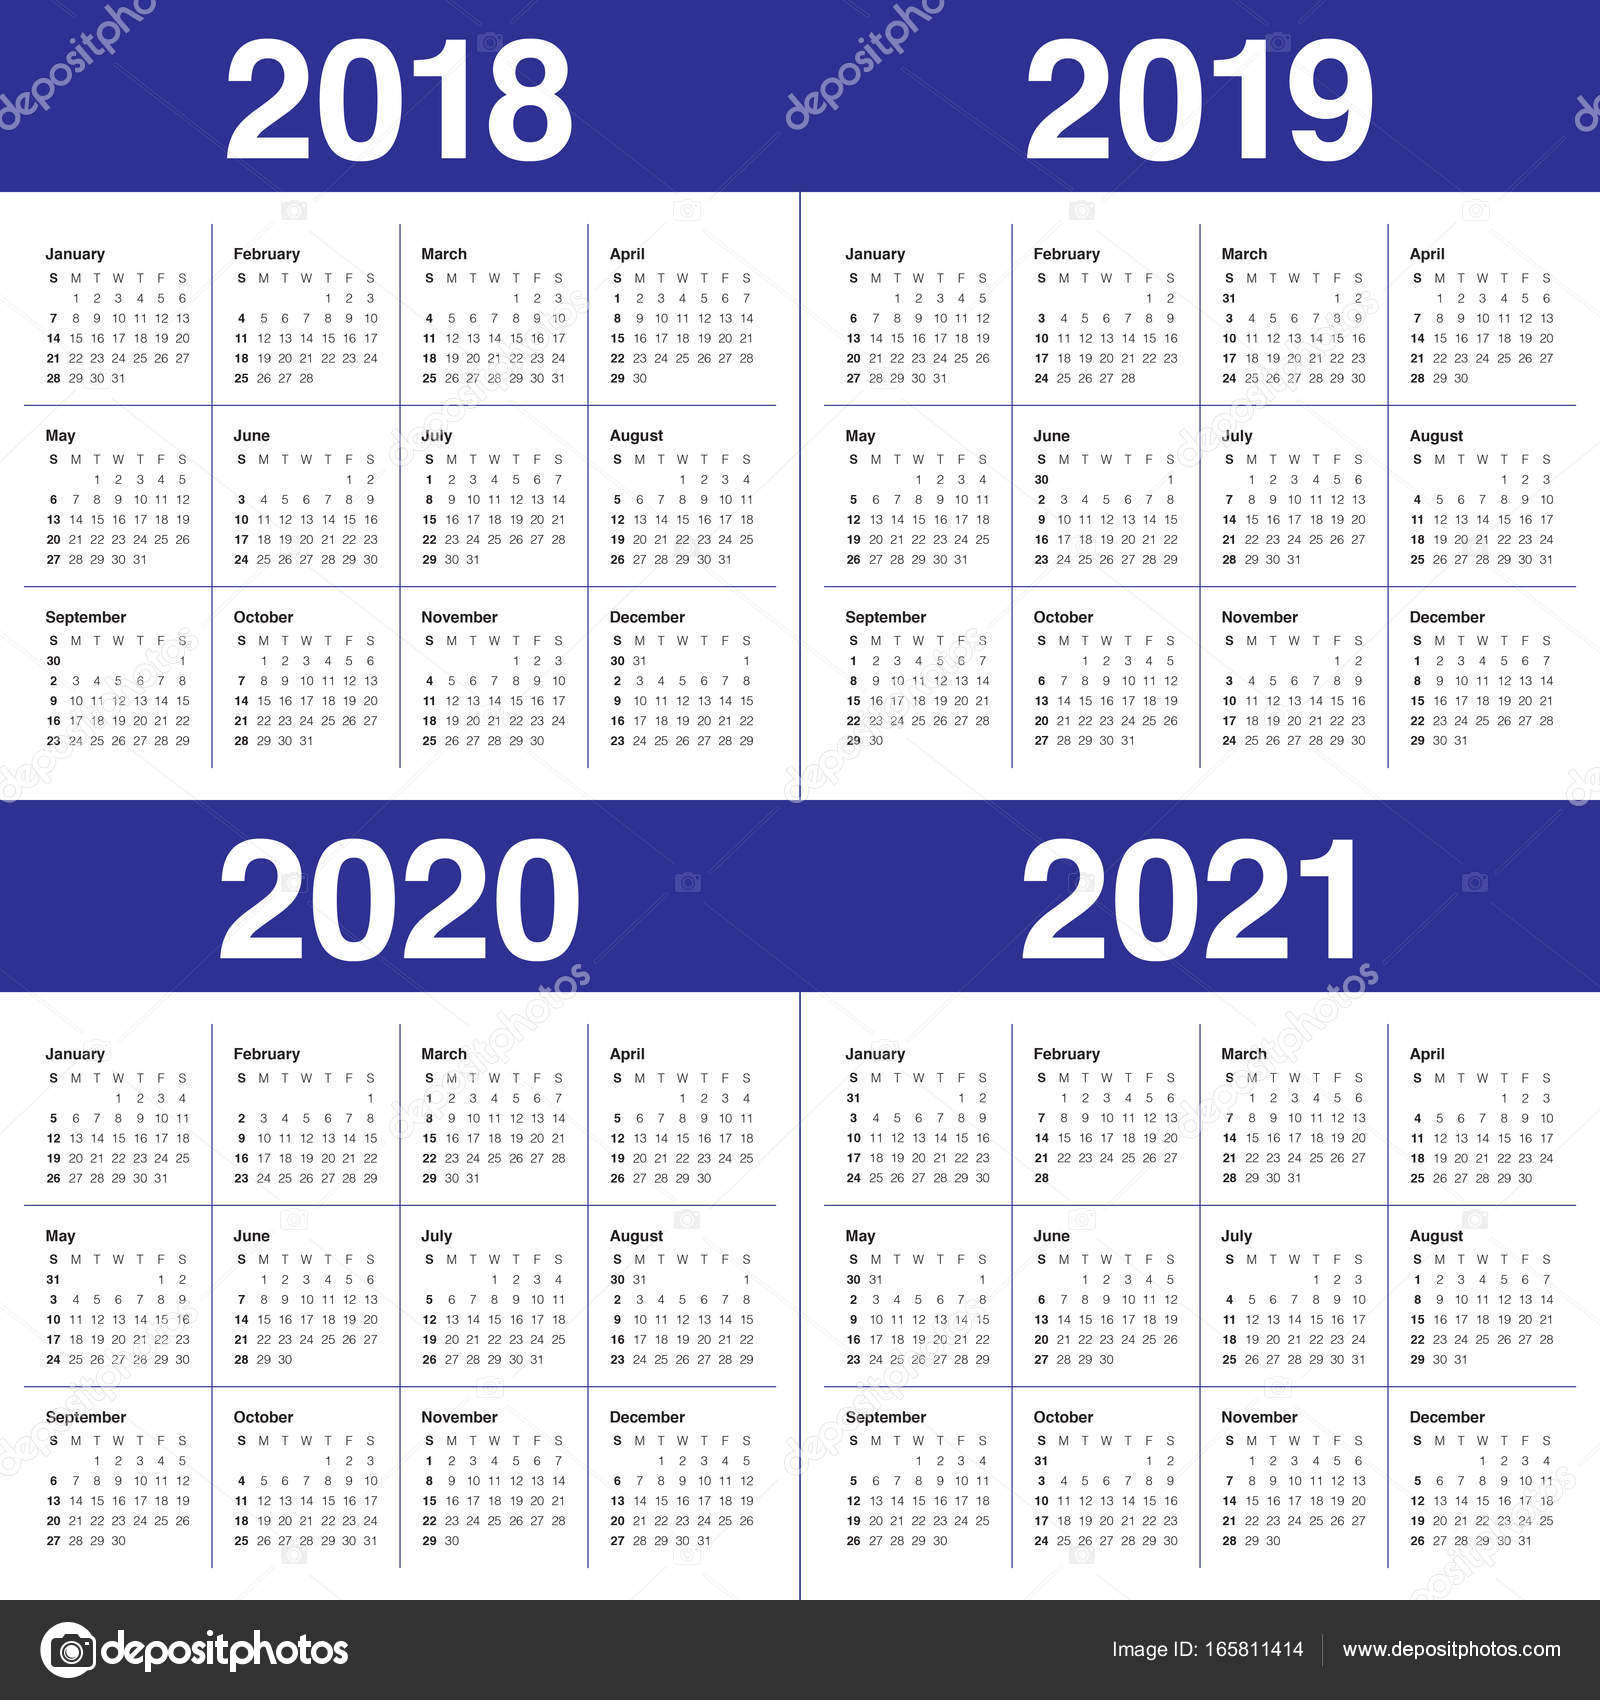 Calendar Template 2018 2019 And 2020 Years Vector Image | Images and ...